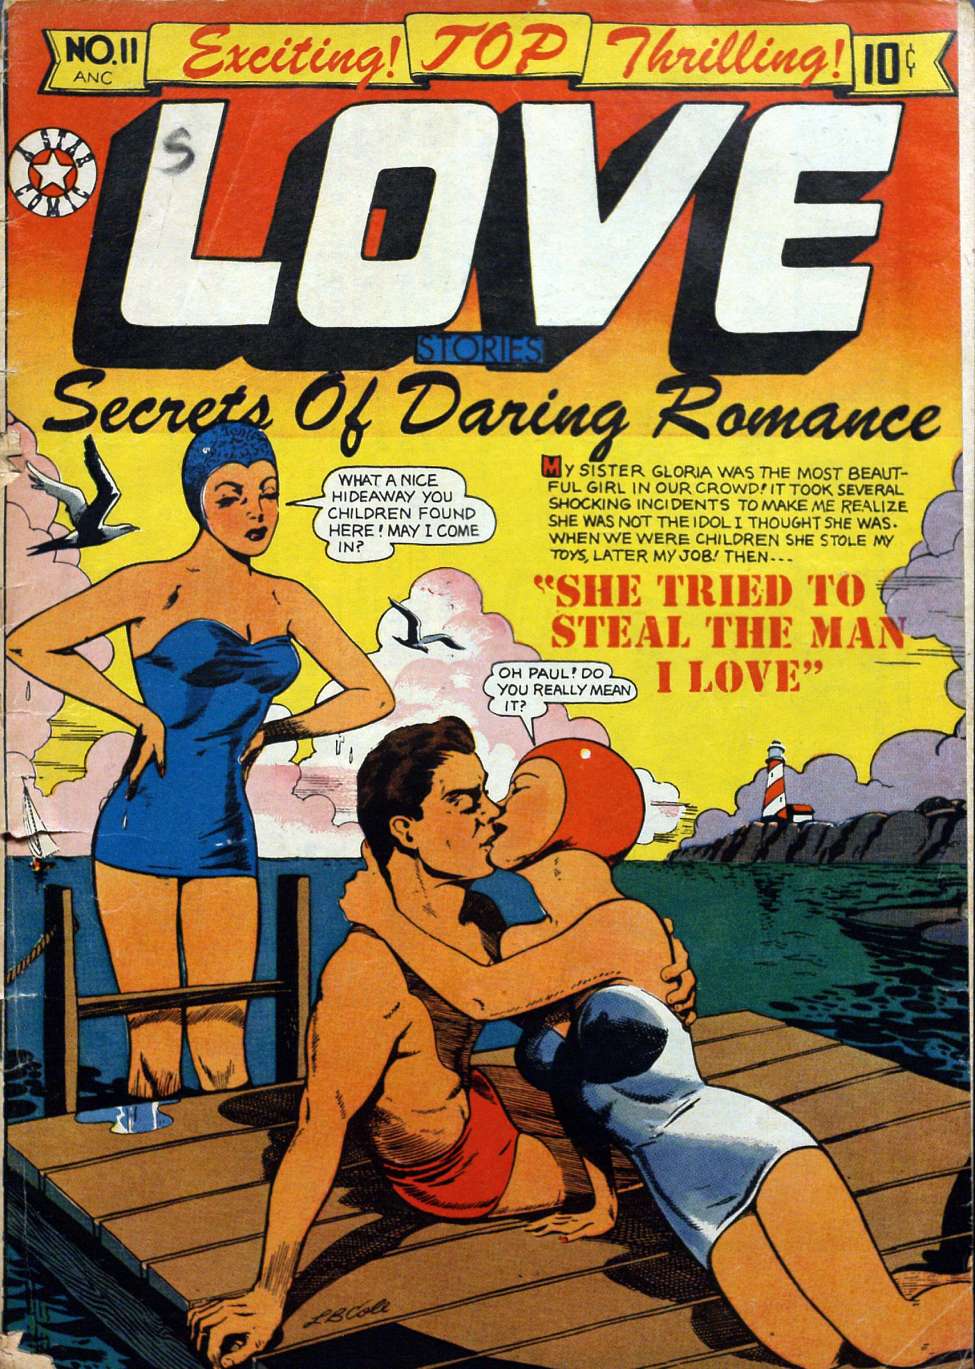 Book Cover For Top Love Stories 11